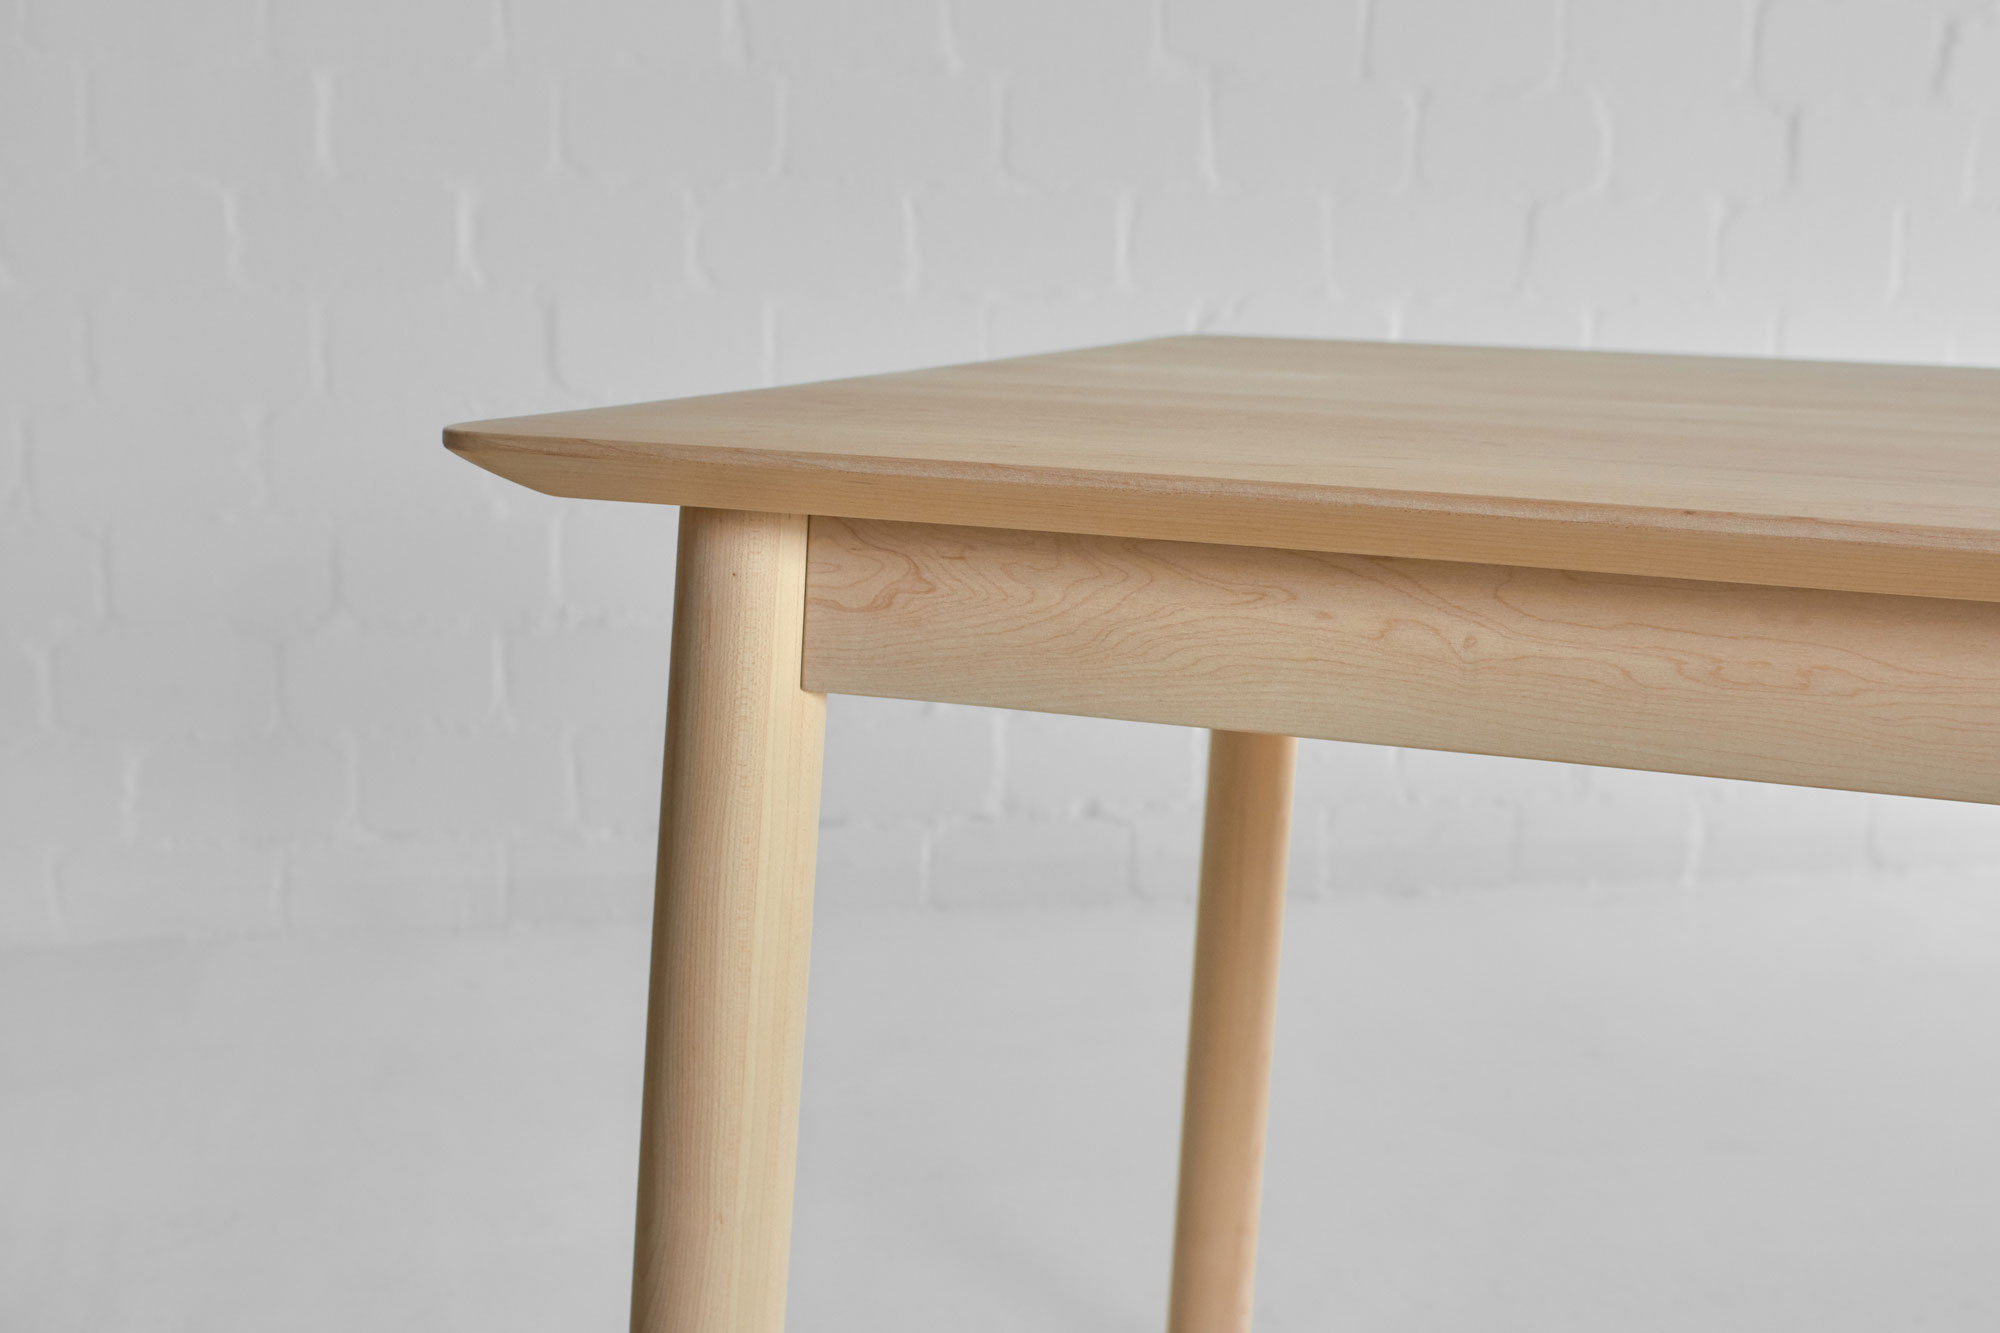 Style Wood Table LOCA 0301 custom made in solid wood by vitamin design